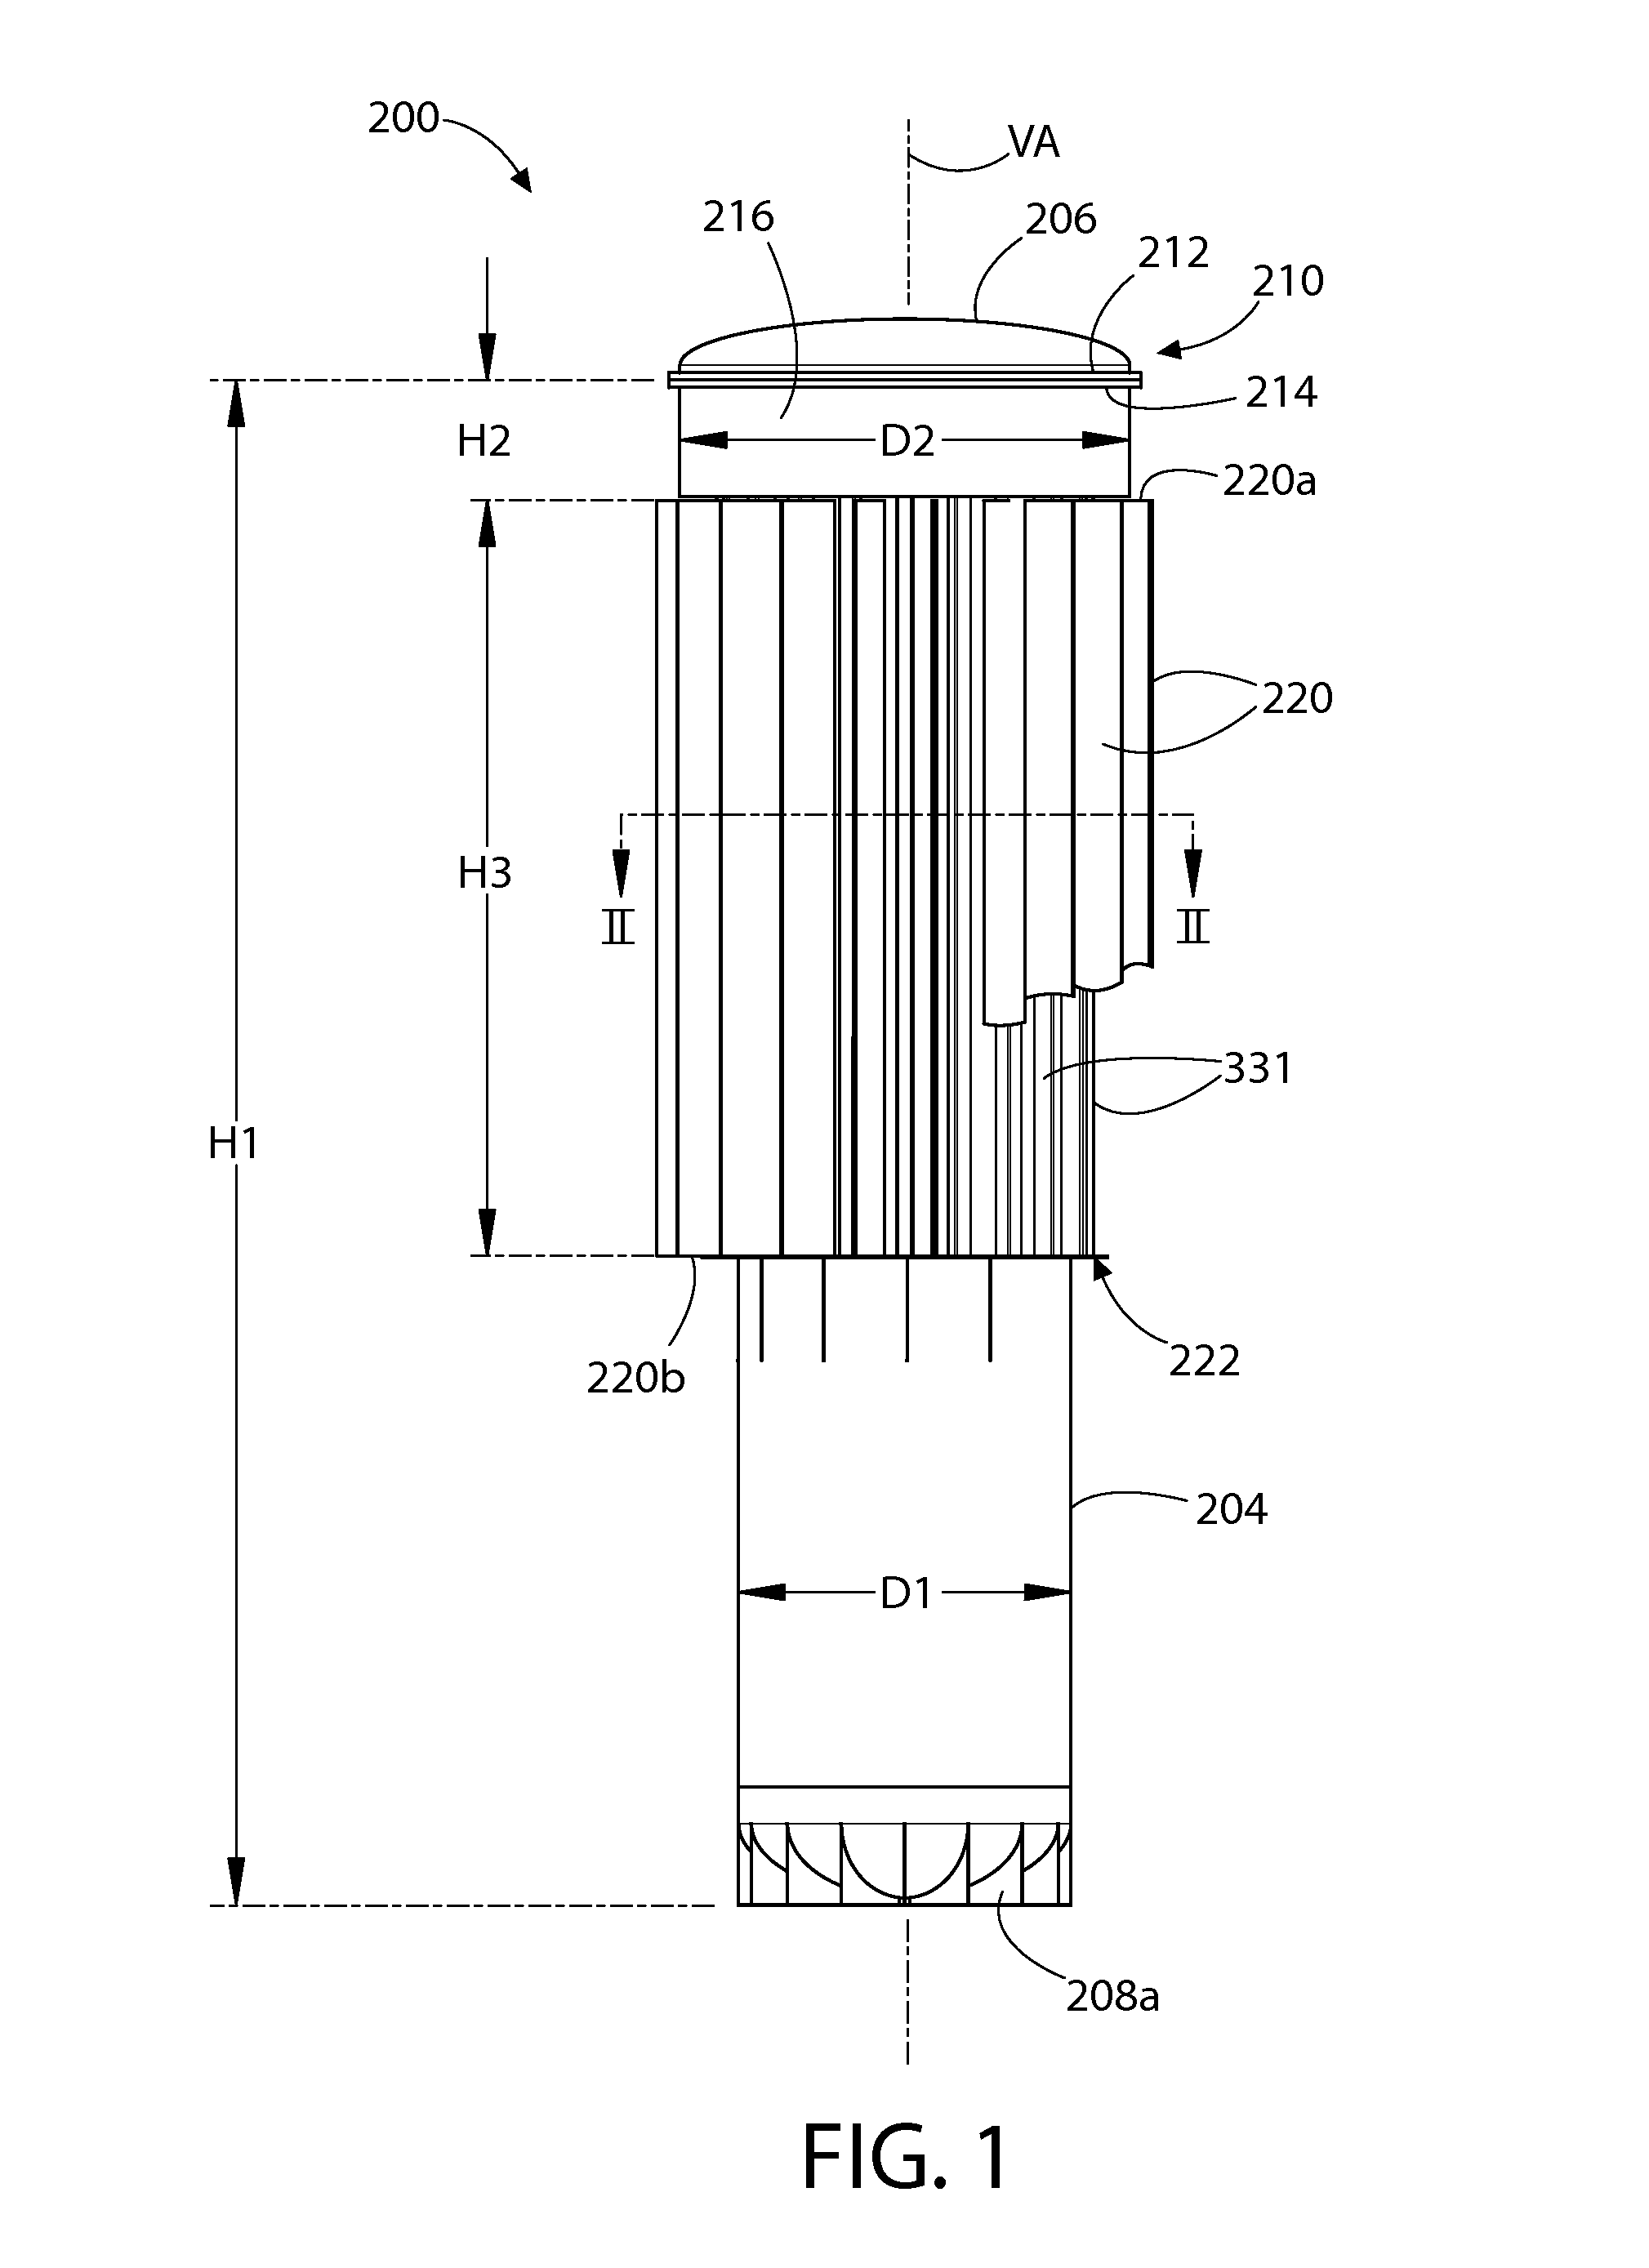 Loss-of-coolant accident reactor cooling system